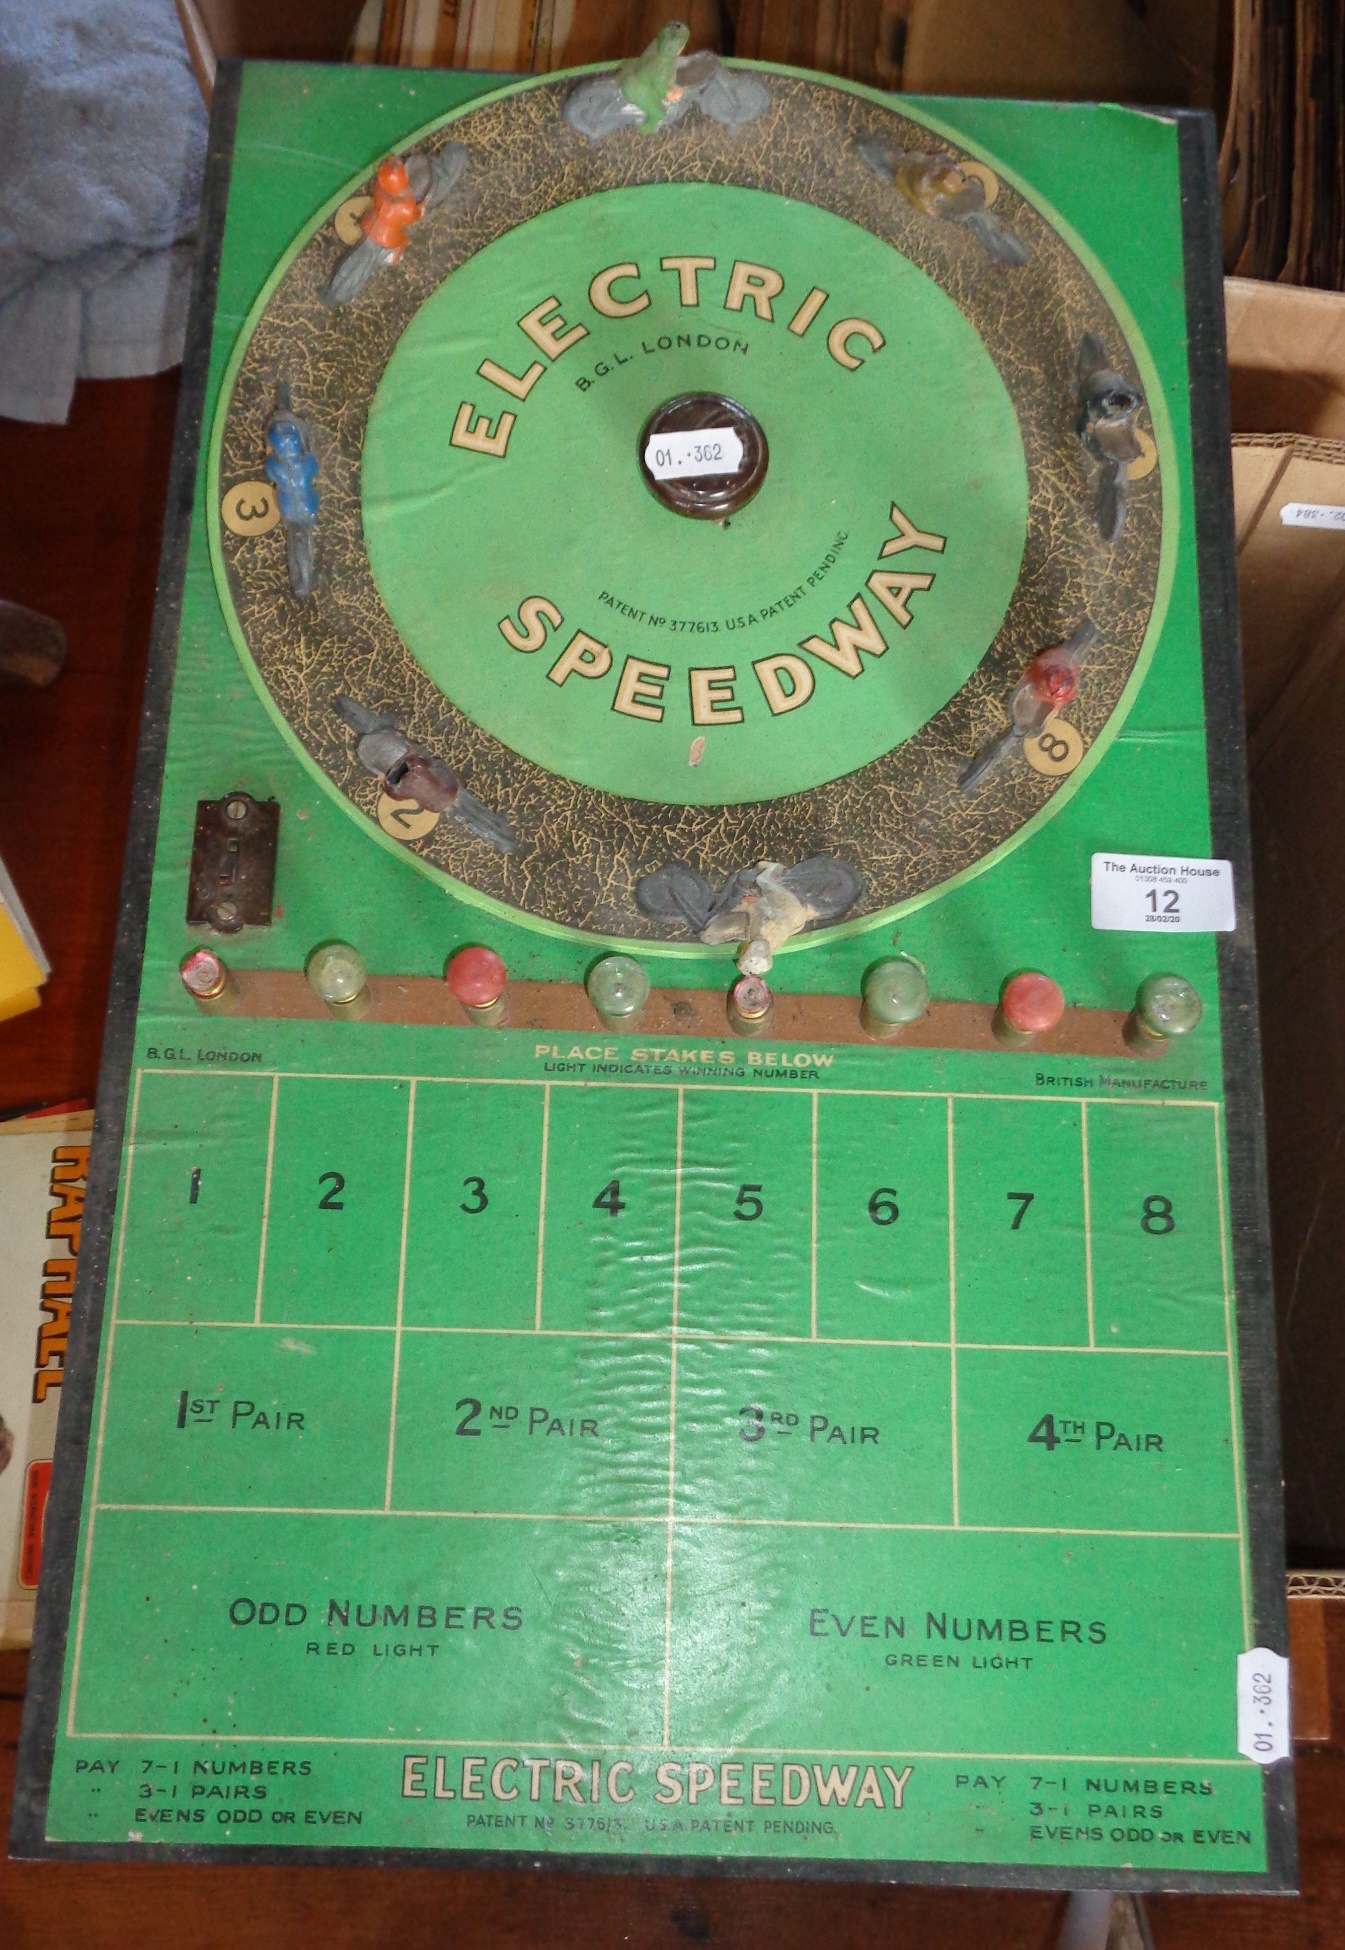 B.G.L. London "Electric Speedway" table game (A/F)